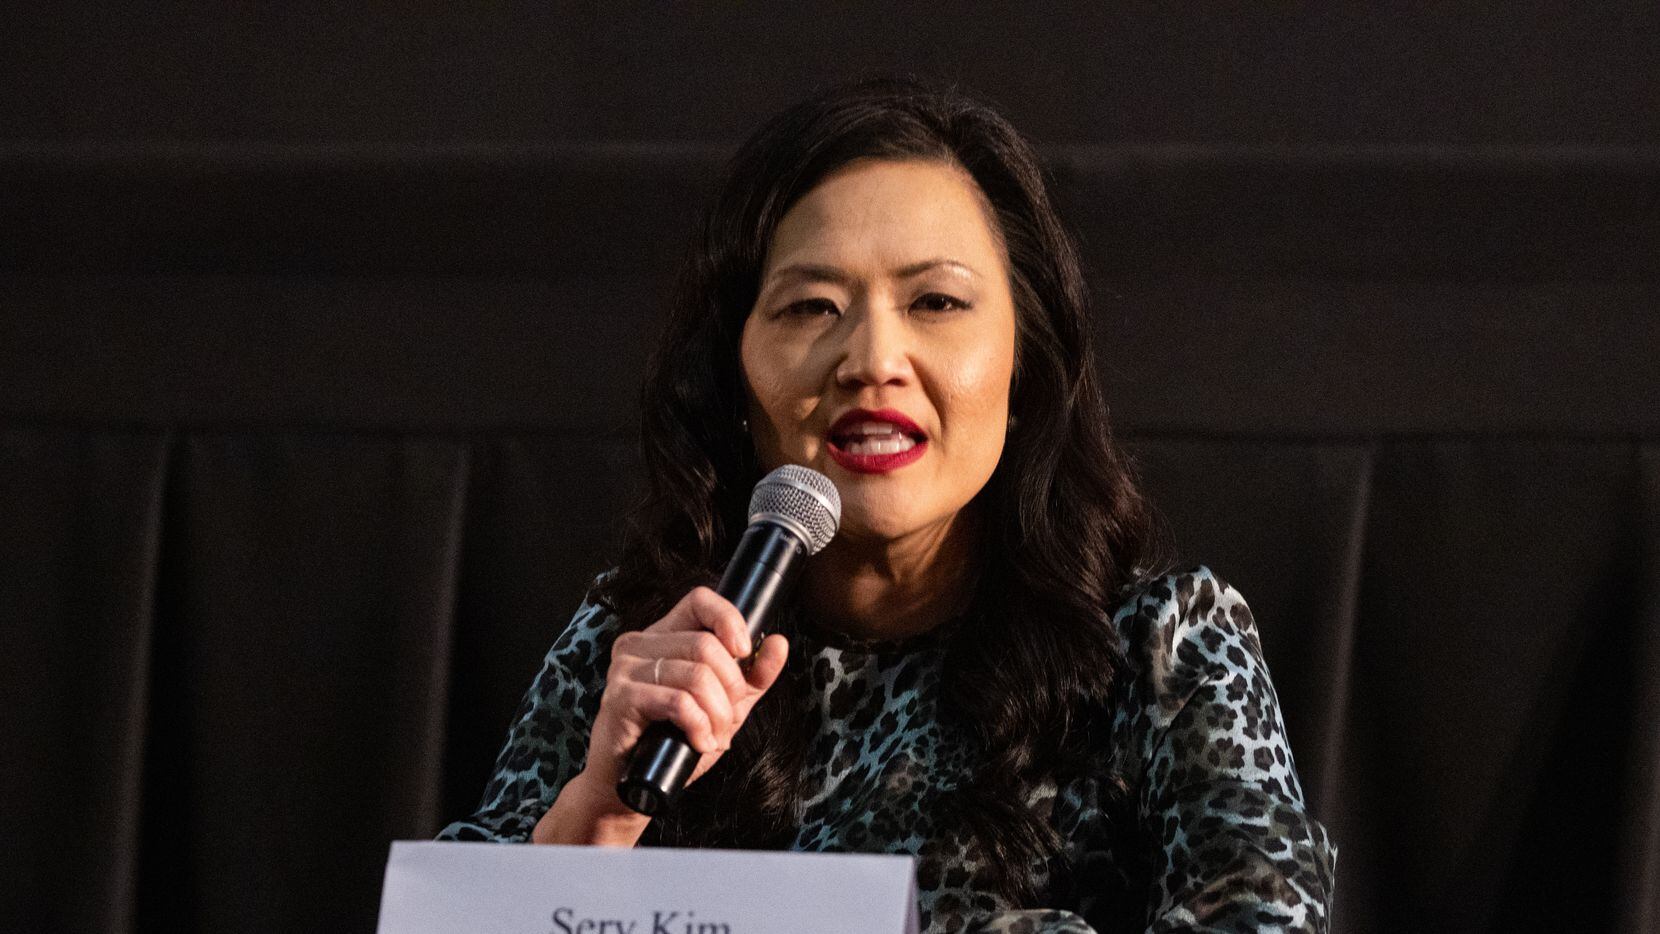 Sery Kim, a Republican candidate running in the 6th Congressional District of Texas race,...